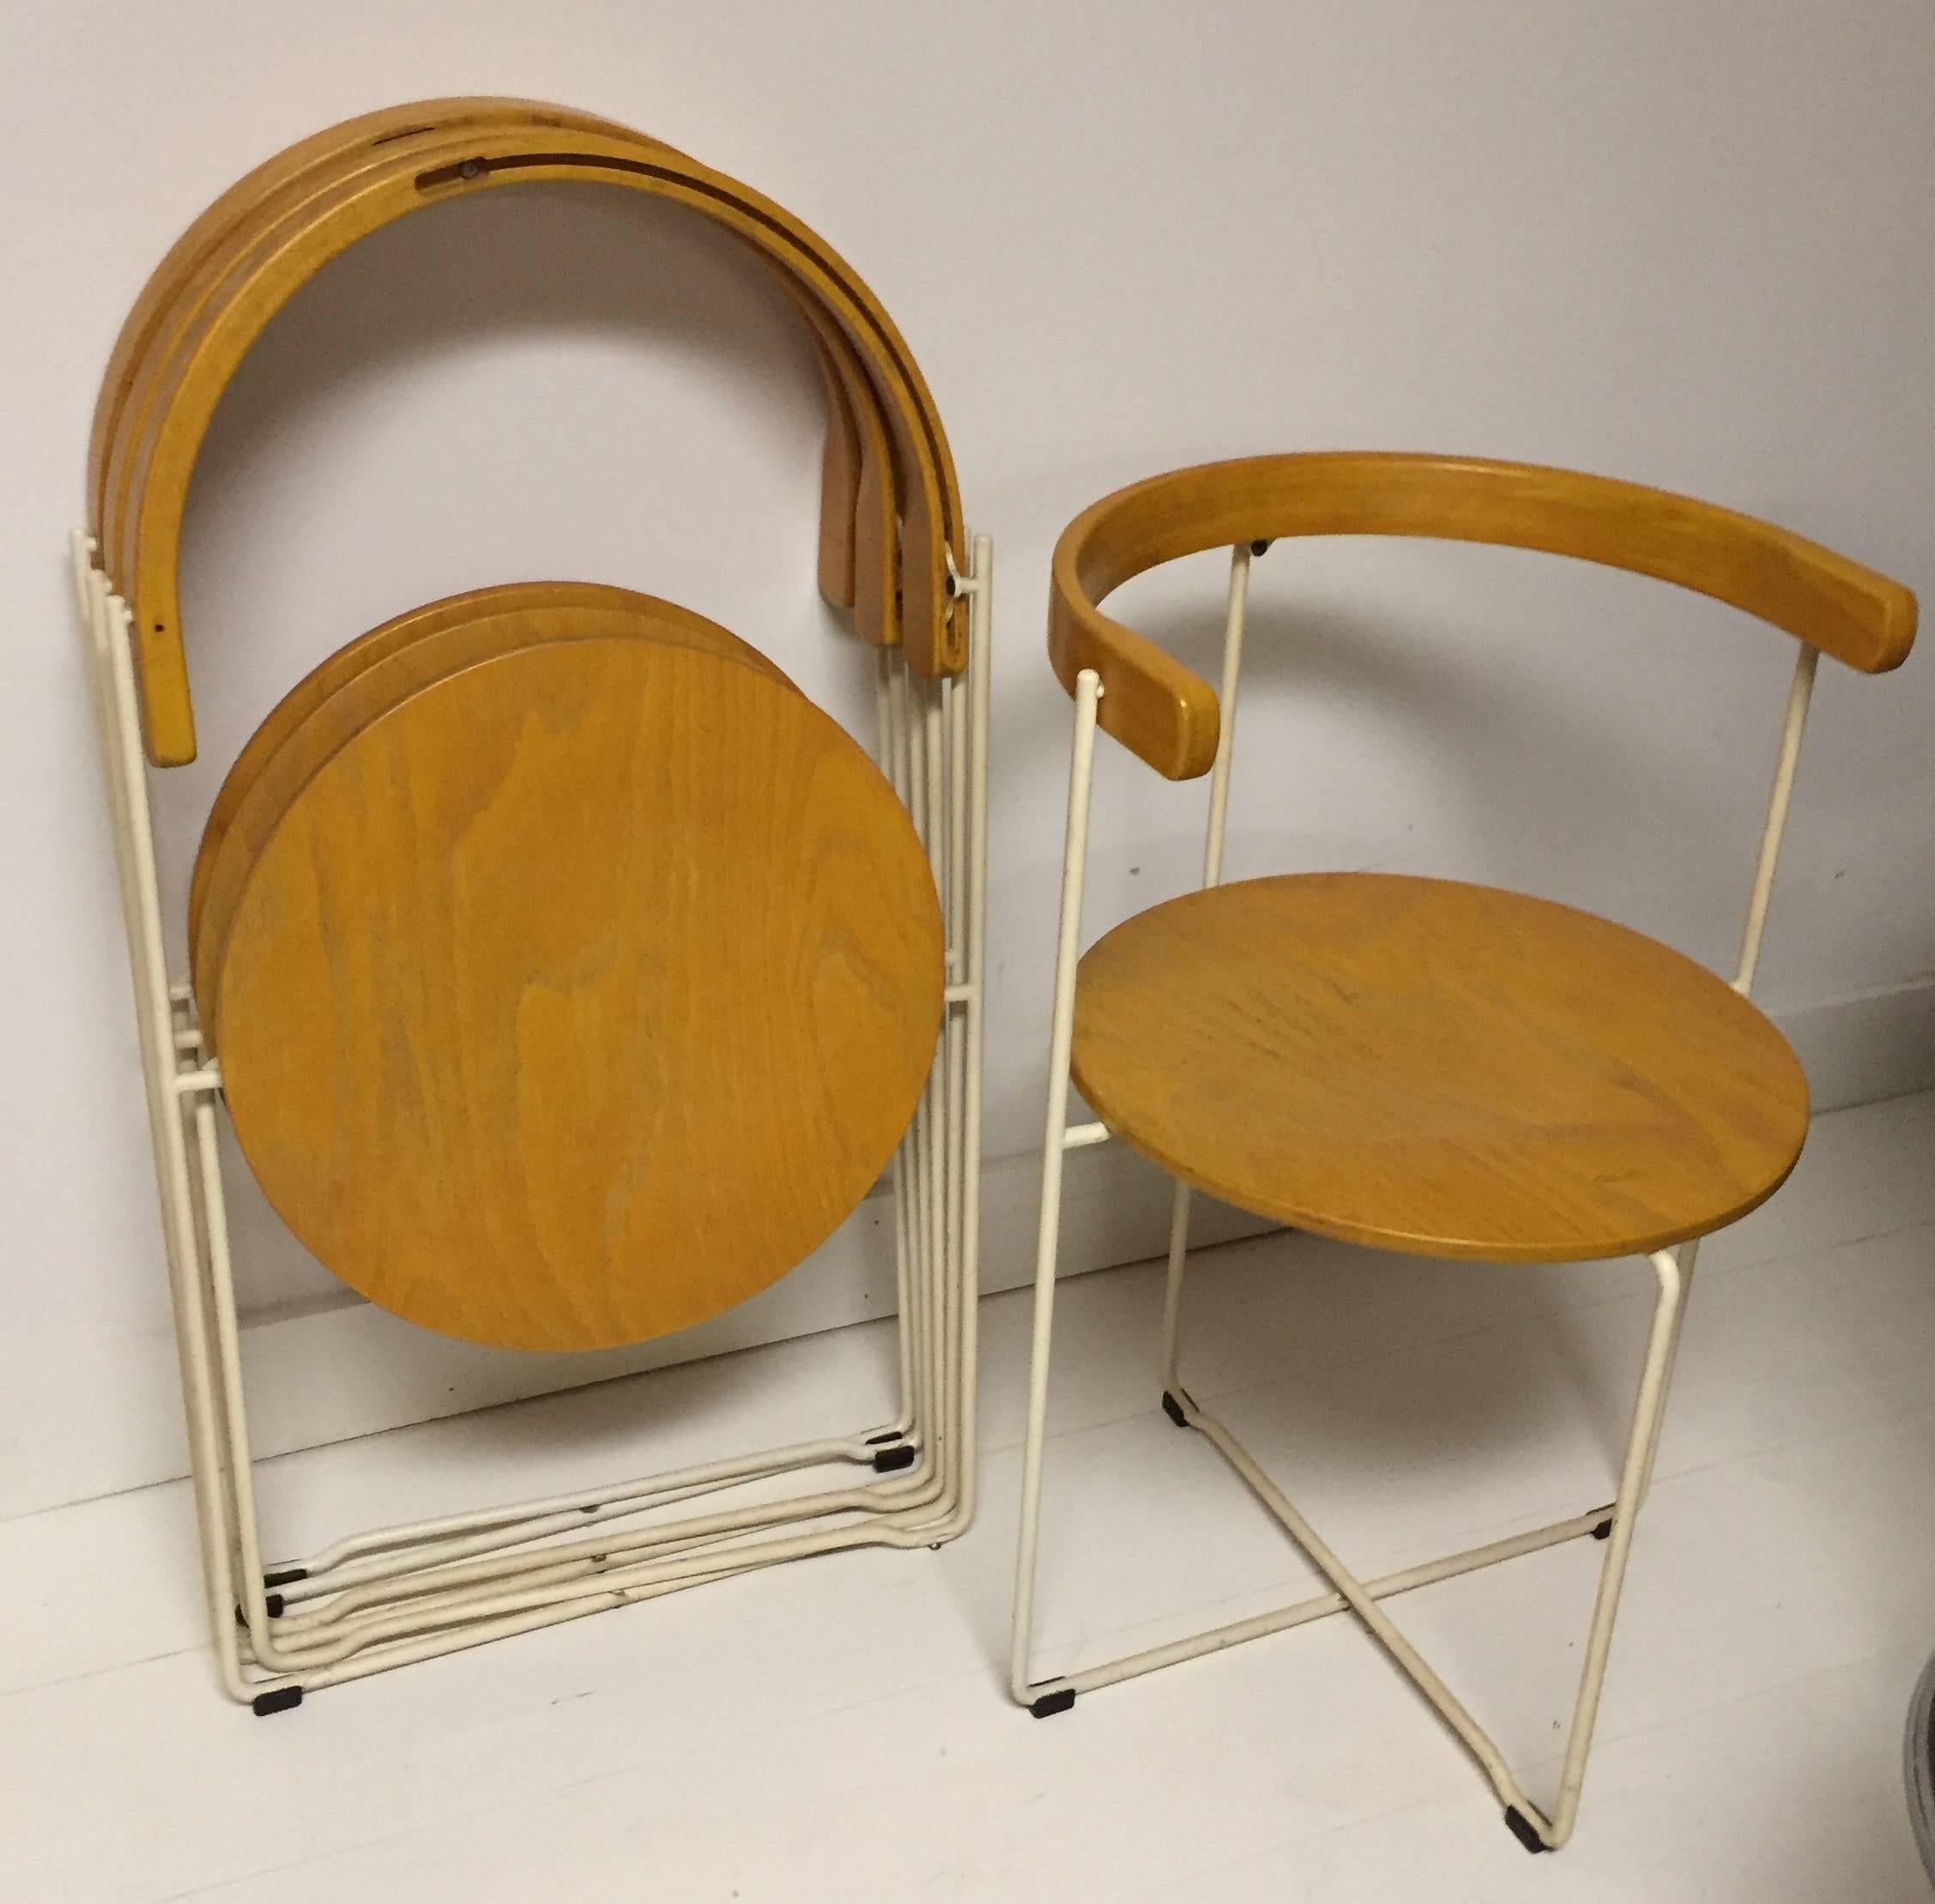 Ingeniously designed birch and enamel metal chairs store flat by open into perhaps the chicest folding chair ever. Produced by Kusch and Co. Matching birch table is also available.